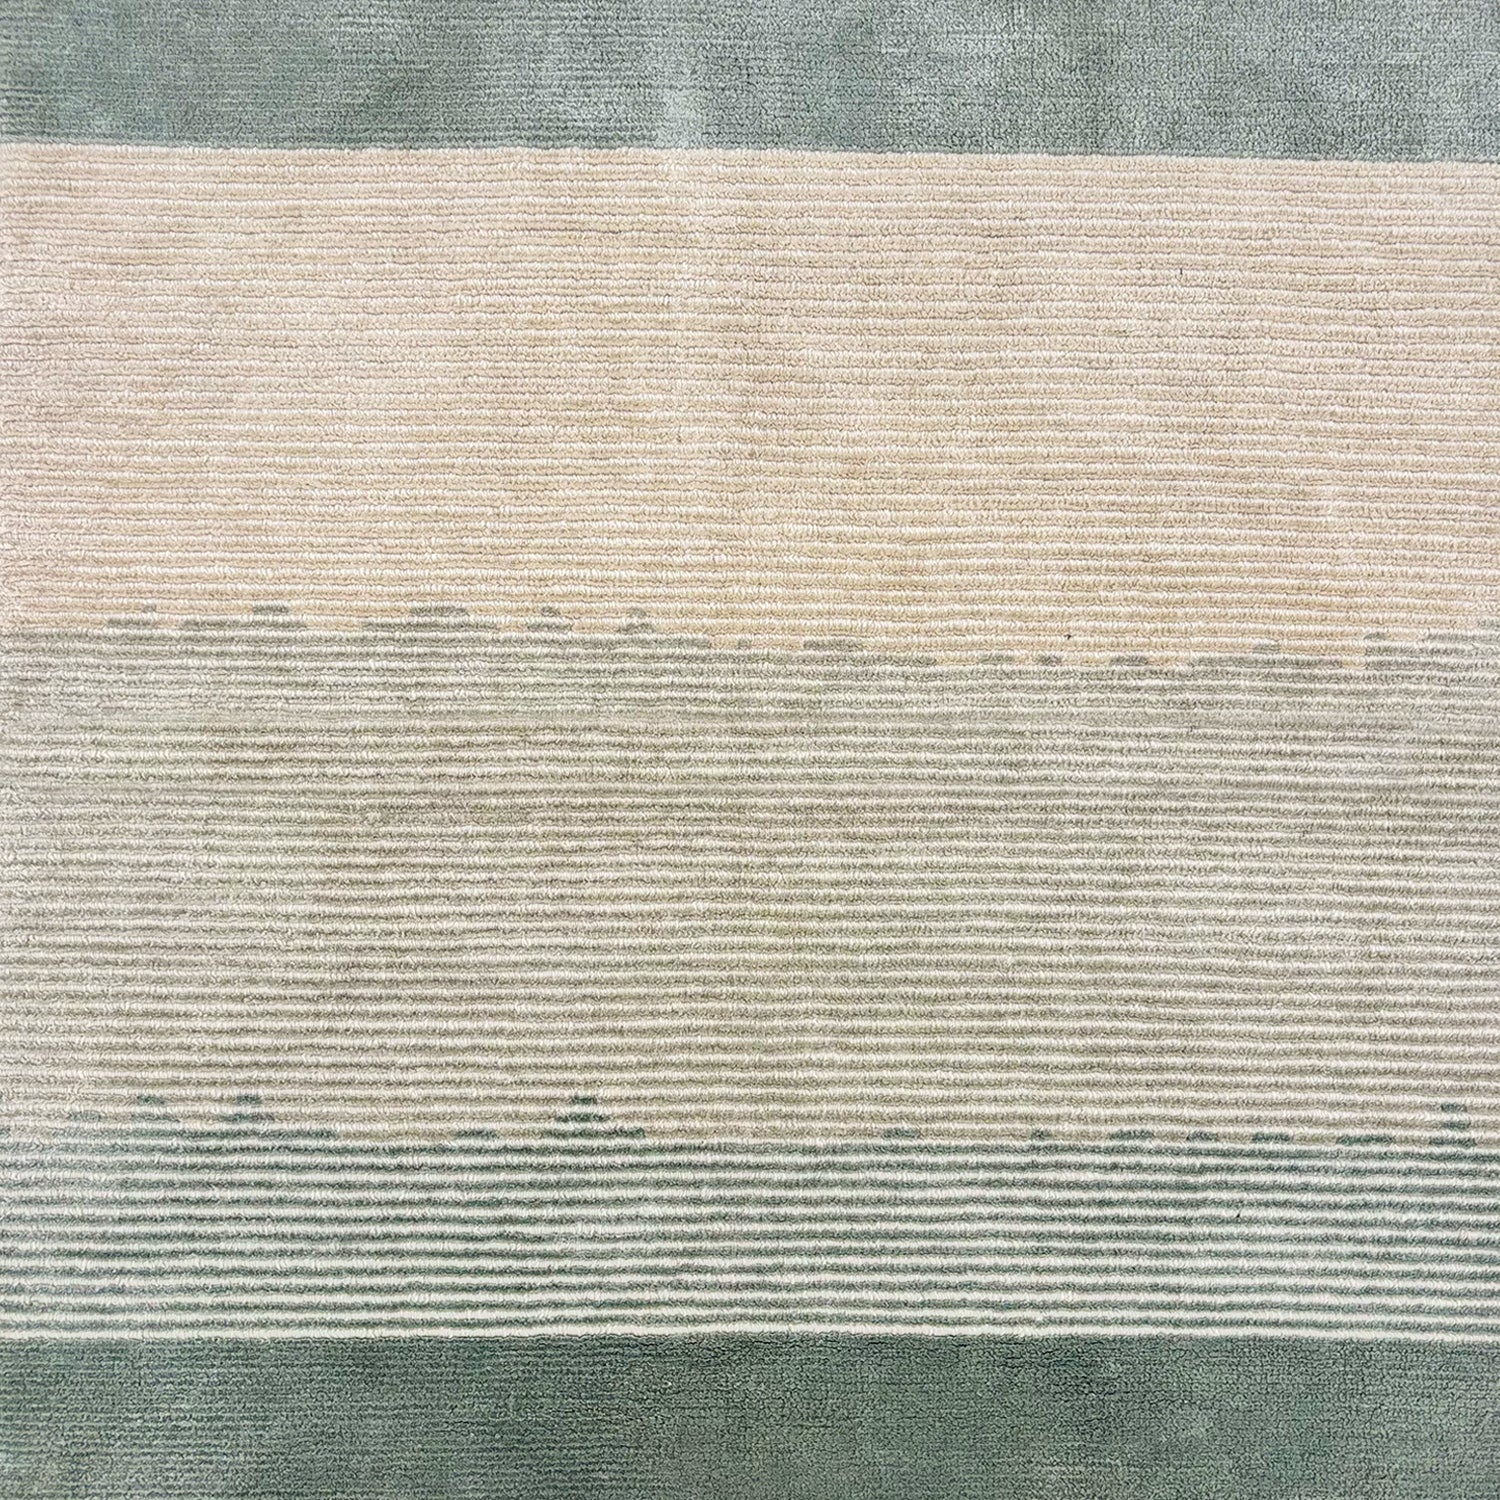 Detail of a handknotted rug with a subtle ombré effect from cream to sage green, with sage green borders